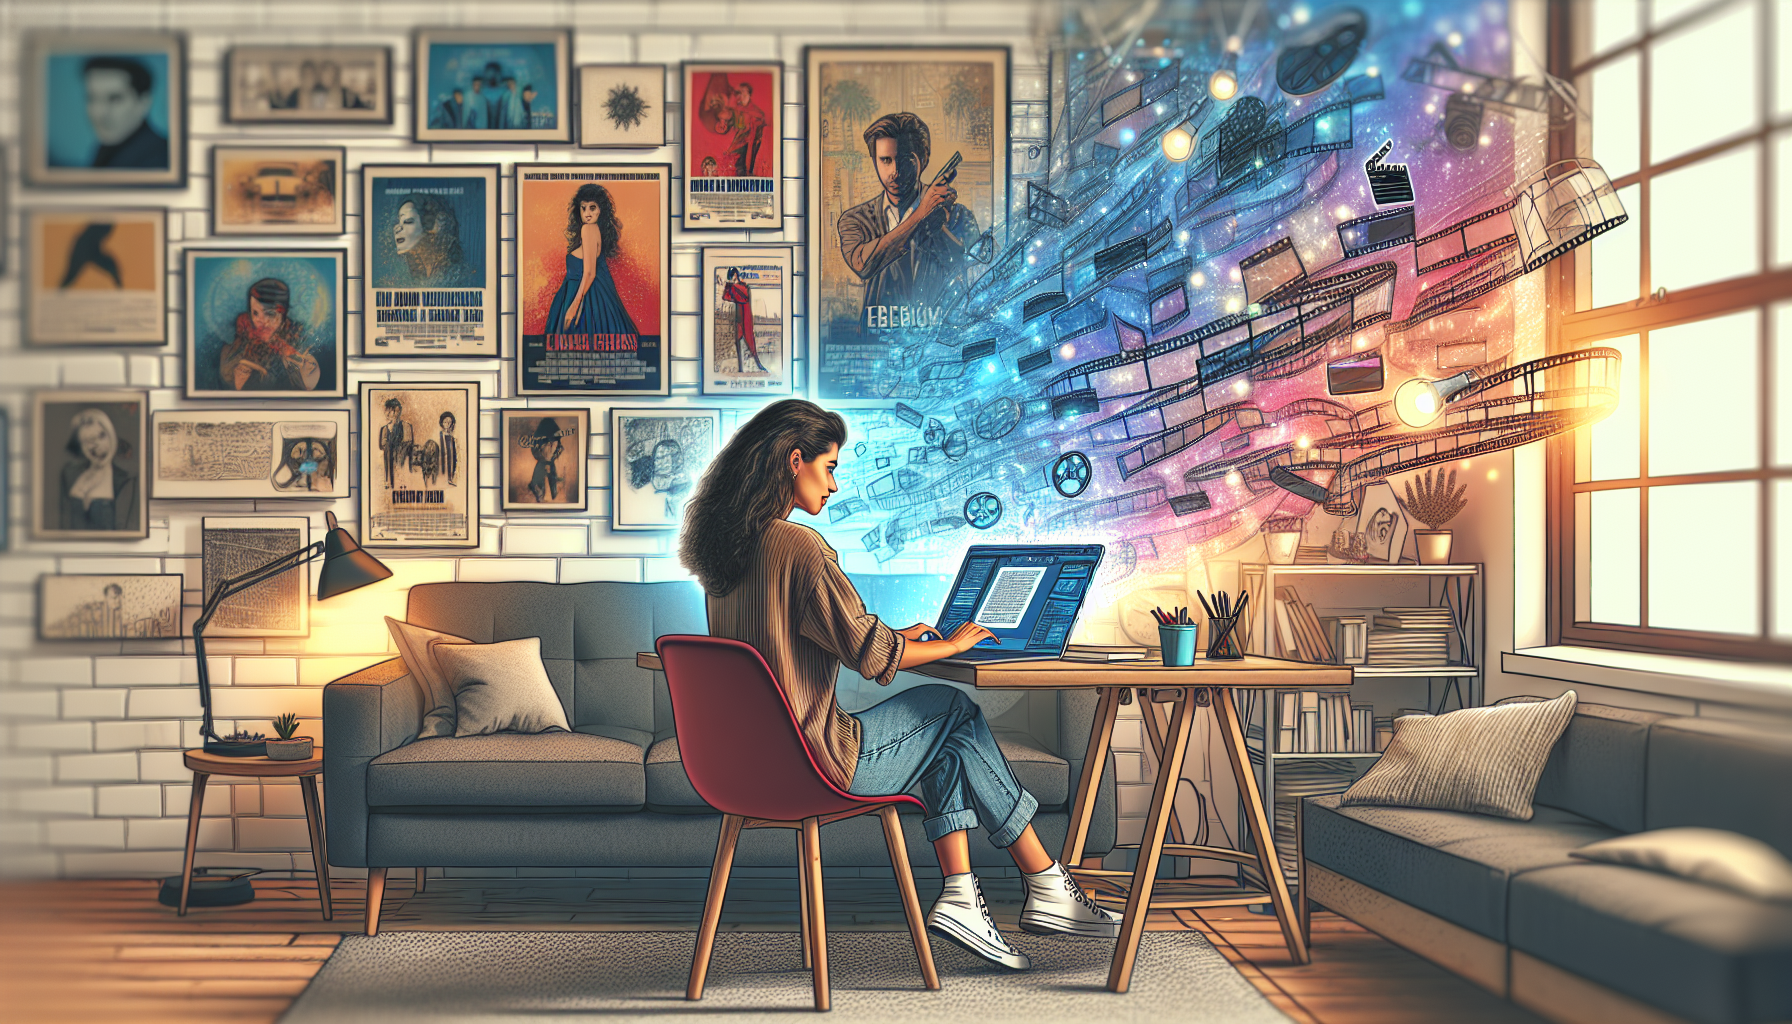 An artist sitting in a cozy, modern home office, surrounded by movie posters, using Movie Magic Screenwriter software on a laptop, with elements of the software interface floating in a holographic dis